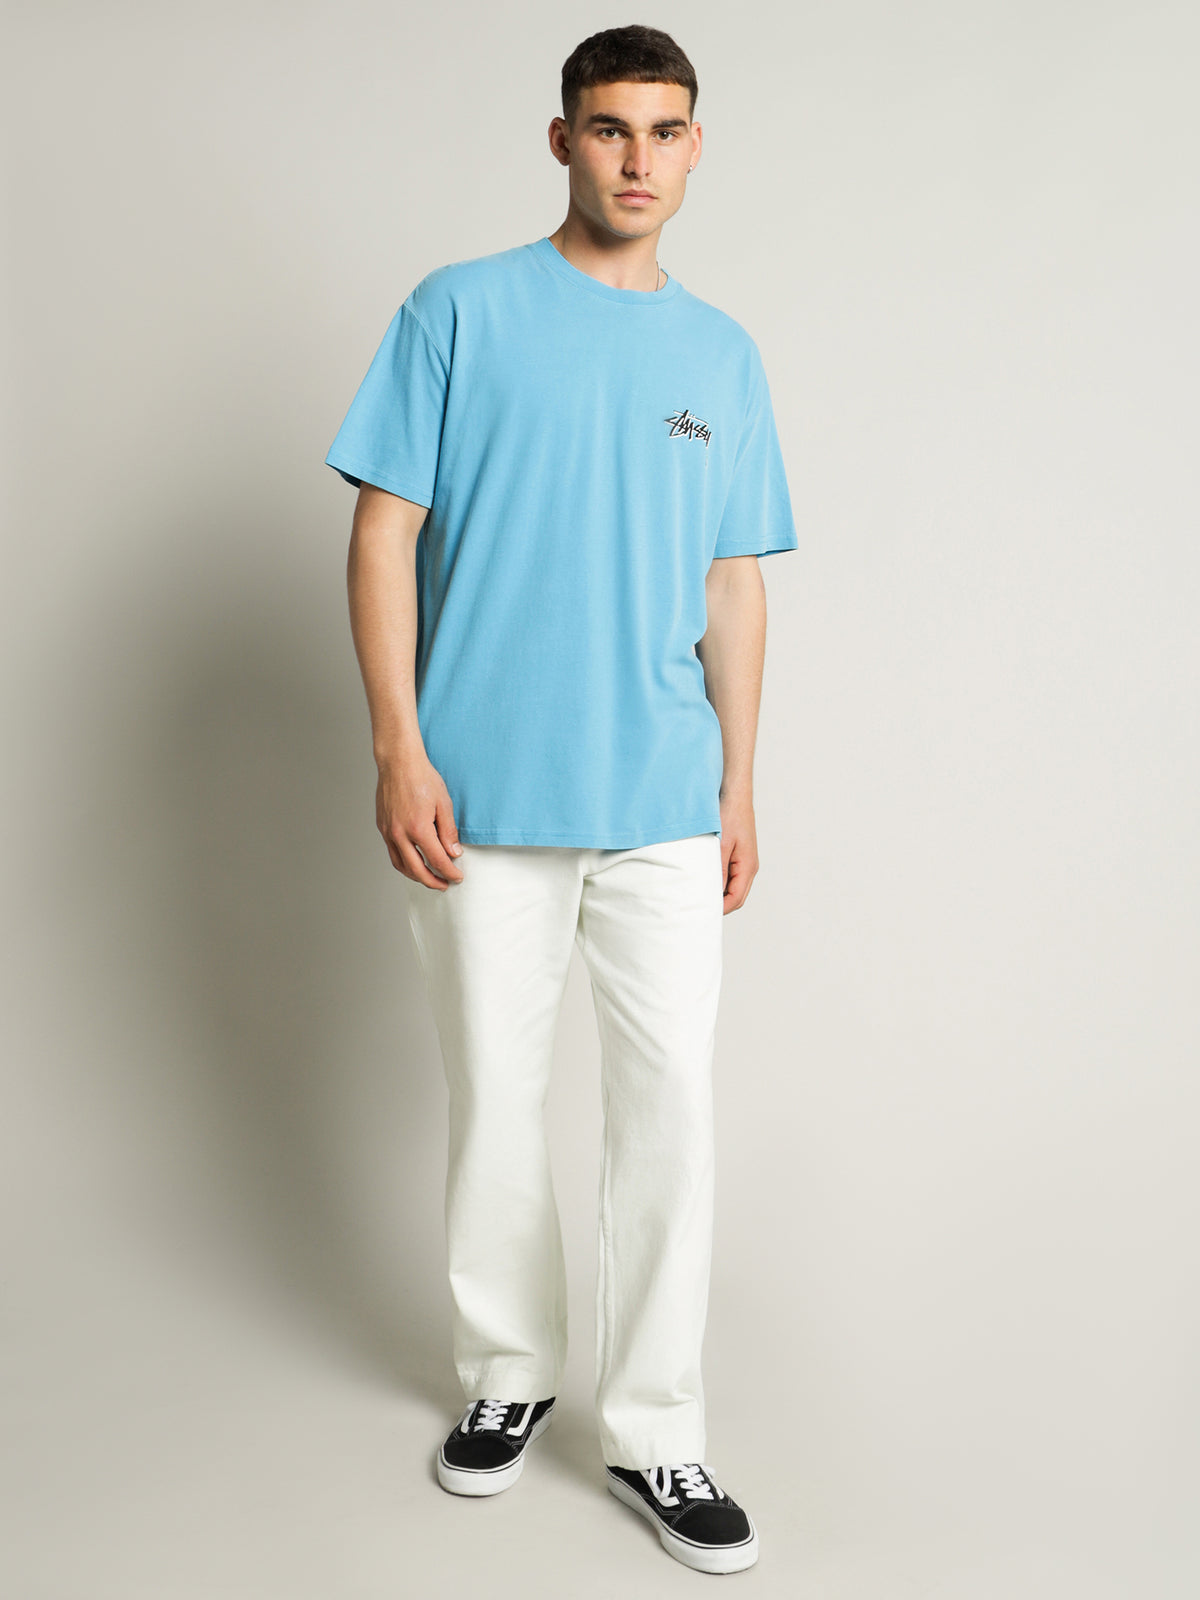 Shadow Stock T-Shirt in Pigment Turquoise